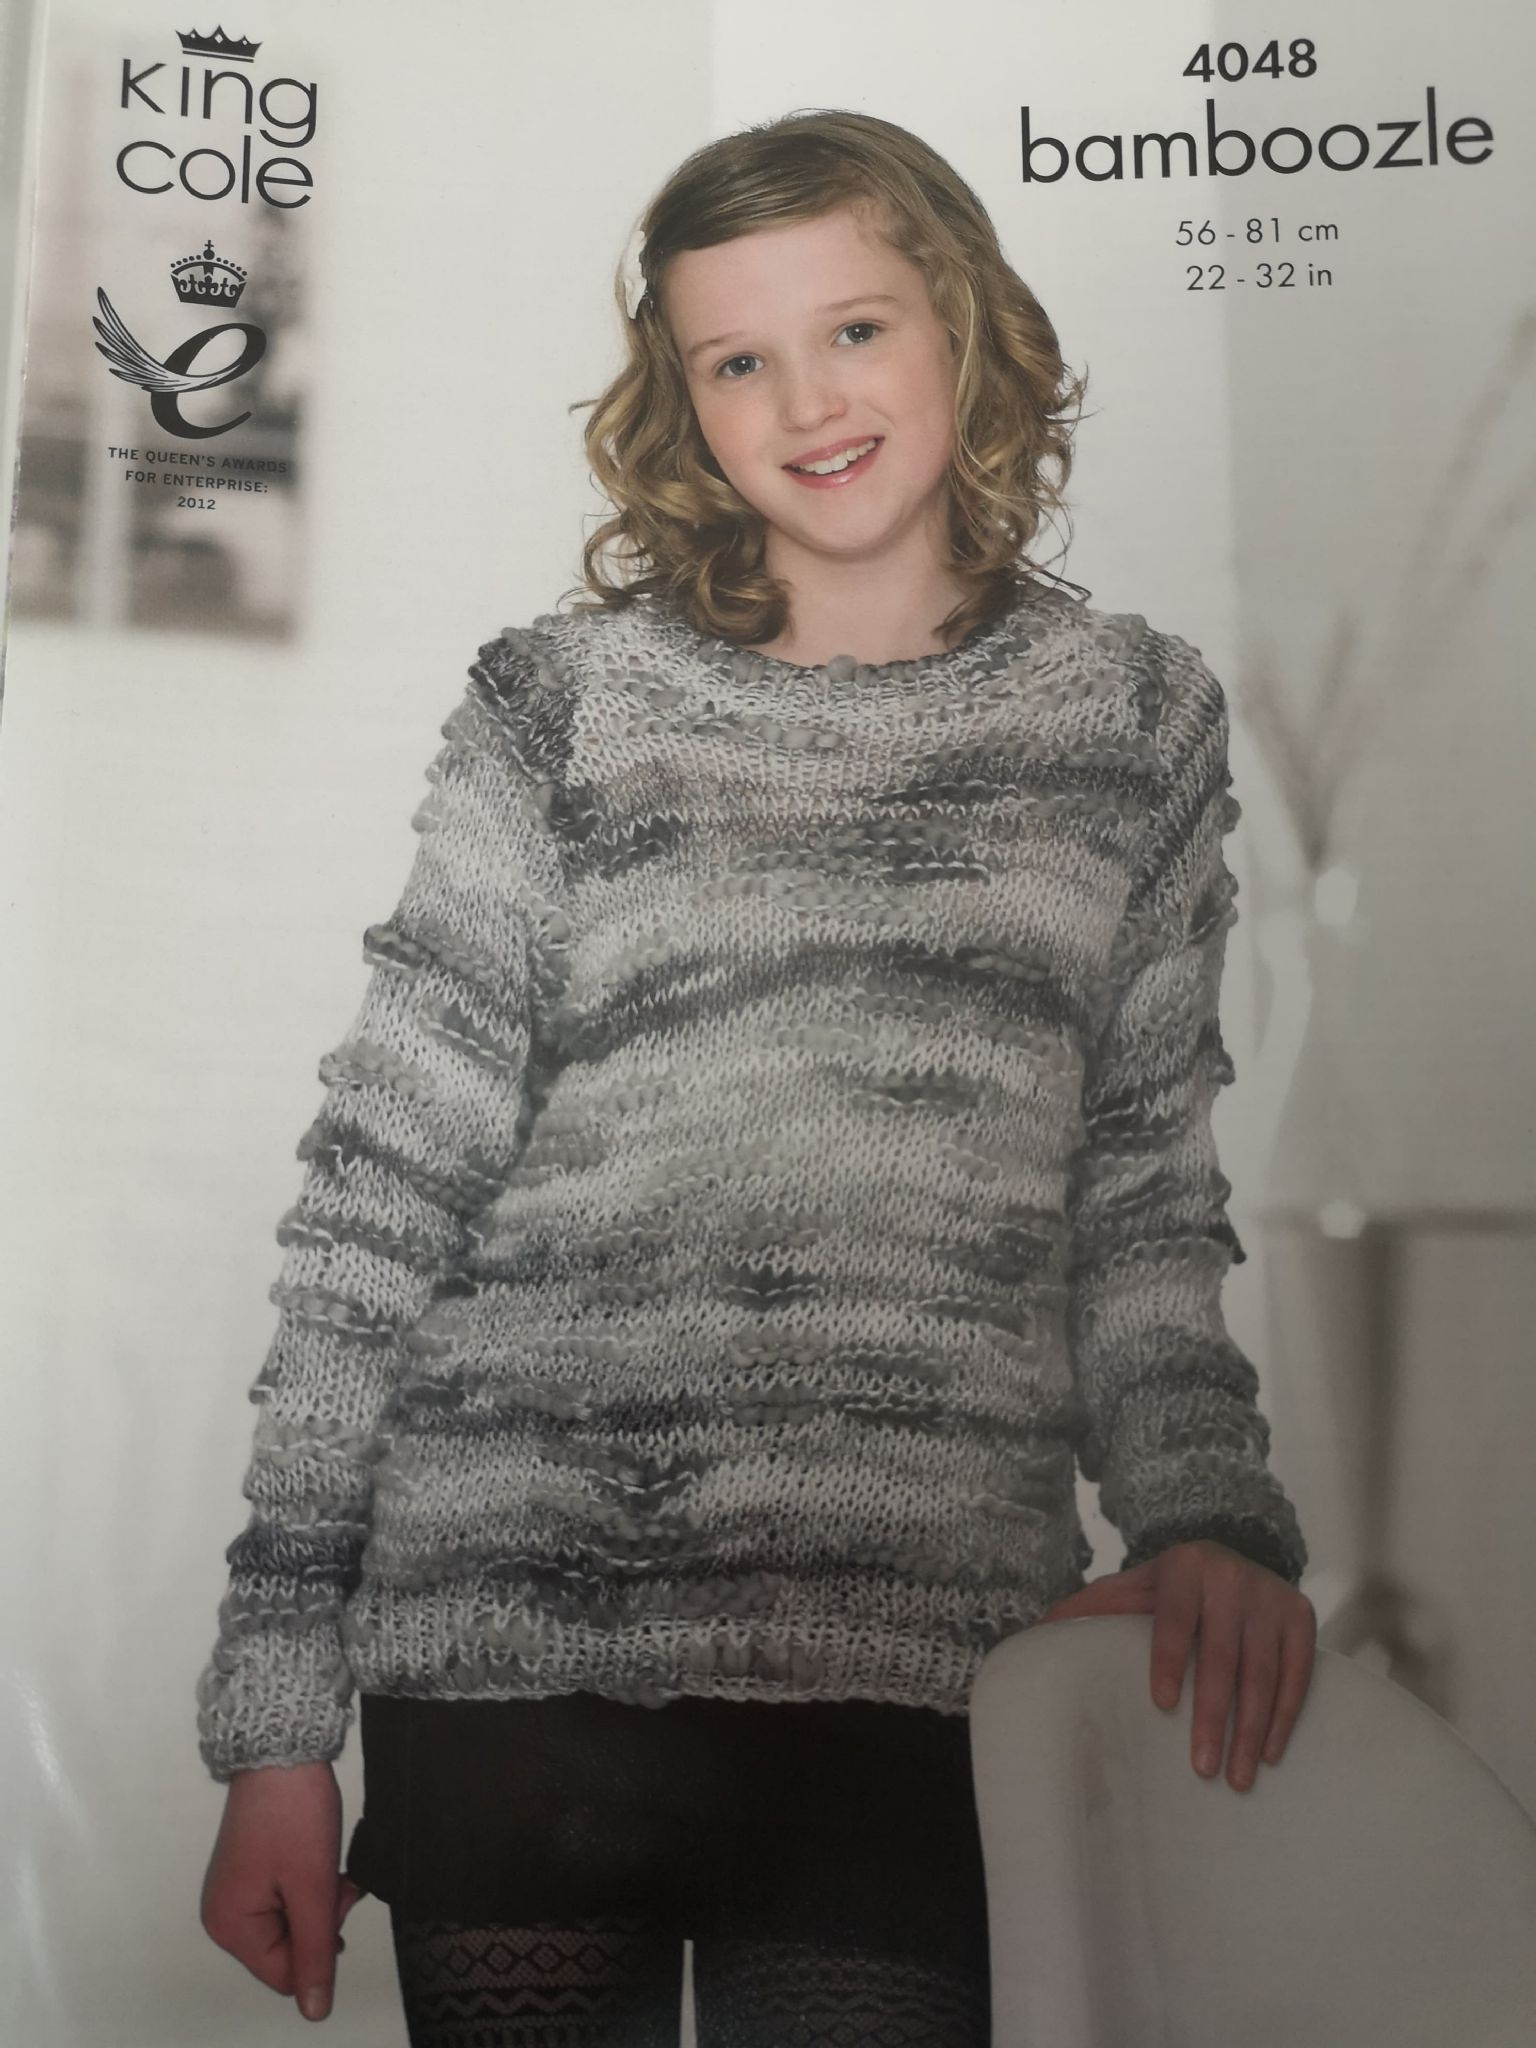 Knitting Patterns For Teenage Sweaters King Cole Girls Sweaters Chunky Knitting Pattern 4048